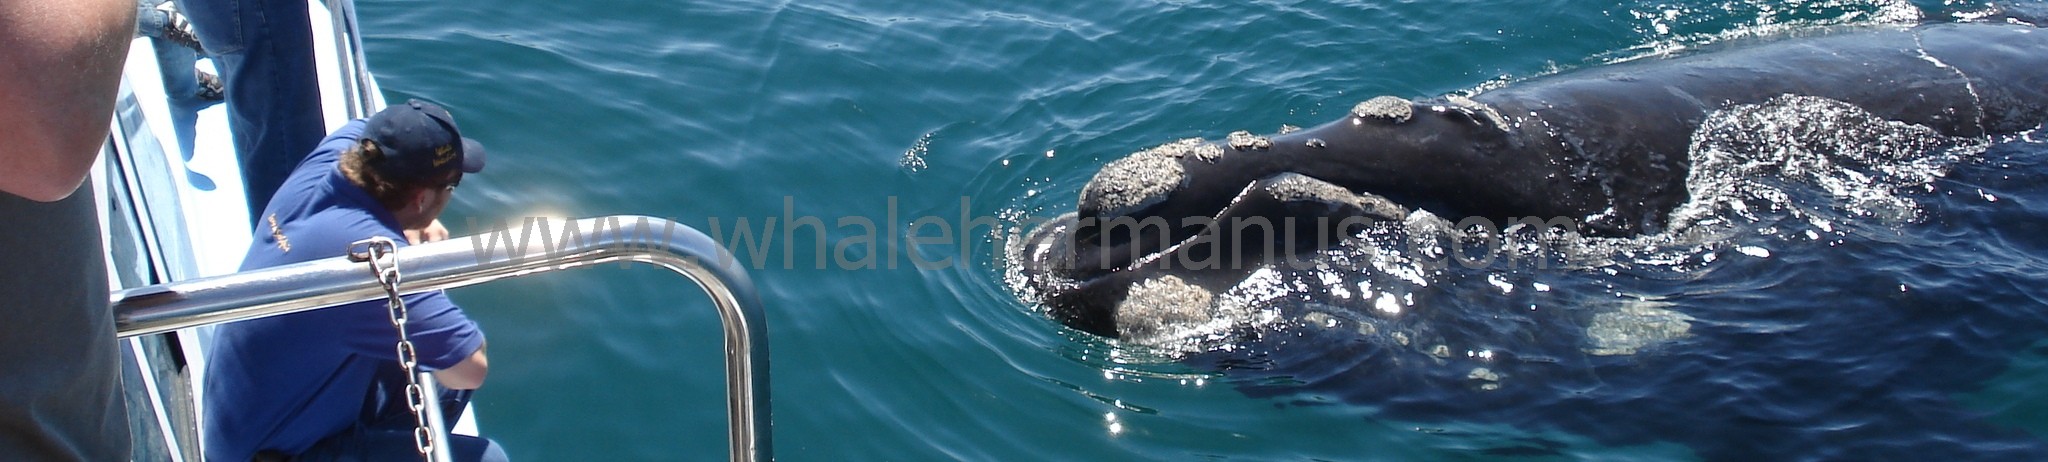 Whale watching boat trips, Whale watching Walking tours of Hermanus, near Cape Town, South Africa